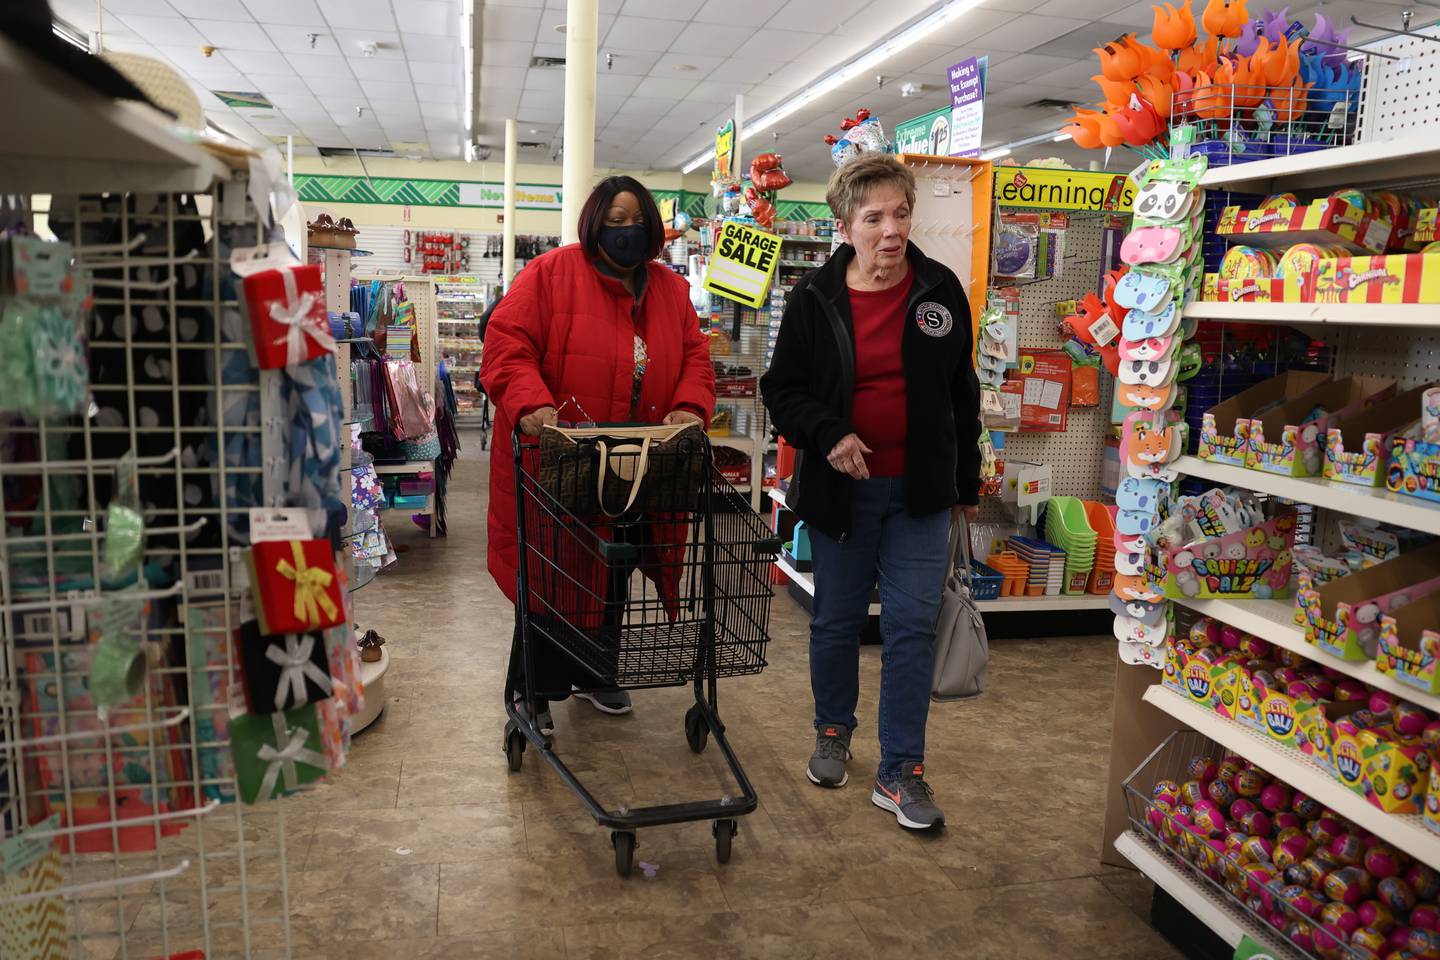 Josephine Simmons, left, and Senior Companion volunteer Karen Stromberger go shopping at a nearby store. Catholic Charities Senior Companion Program offers adults age 55 and older the opportunity  to support and interact with their homebound peers. Wednesday, April 27, 2022, in Crest Hill.